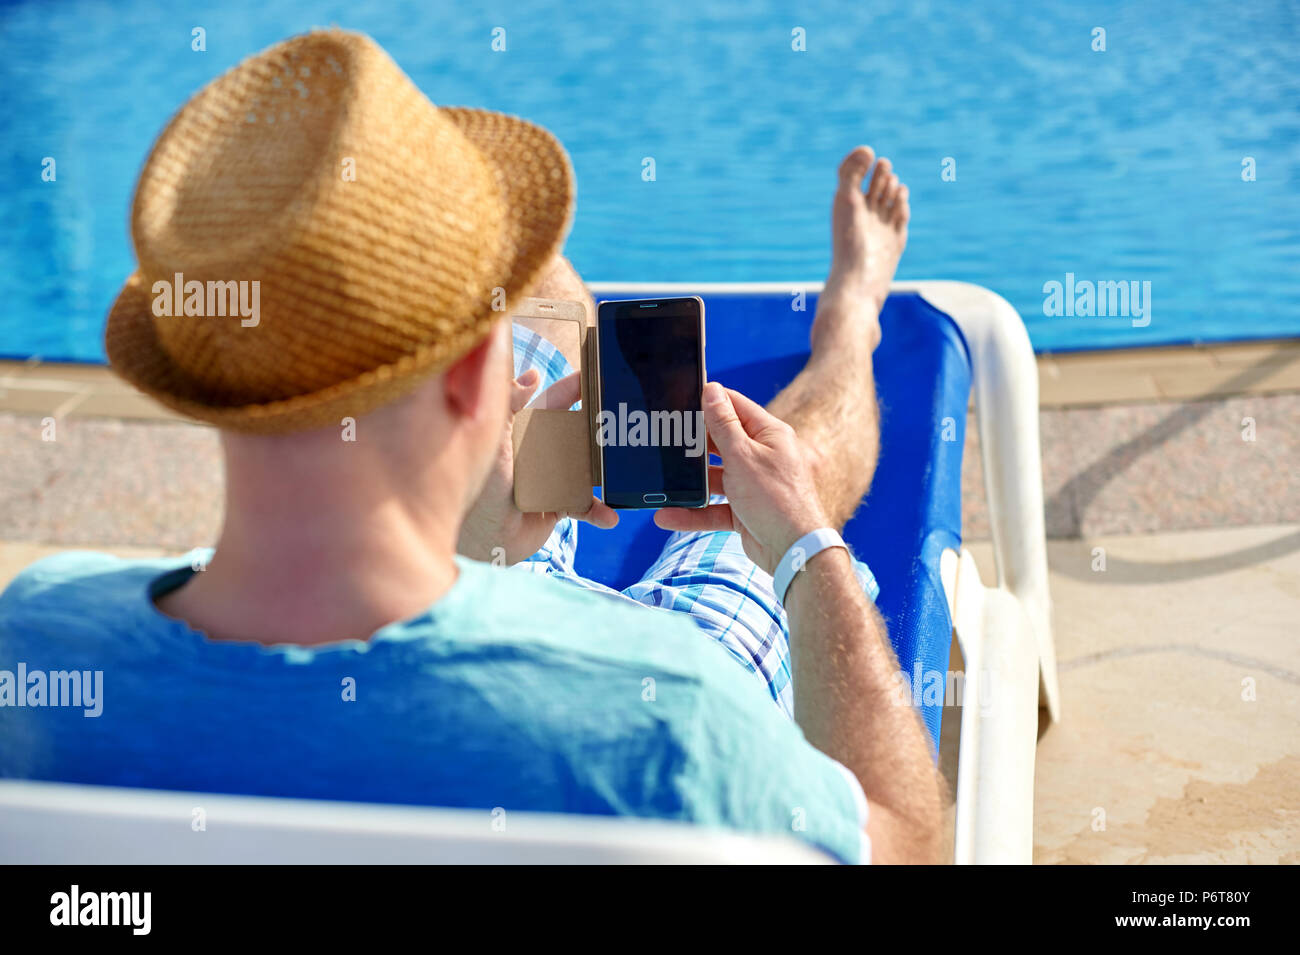 Man using mobile phone on vacation by the pool in hotel, concept of a freelancer working for himself on vacation and travel Stock Photo